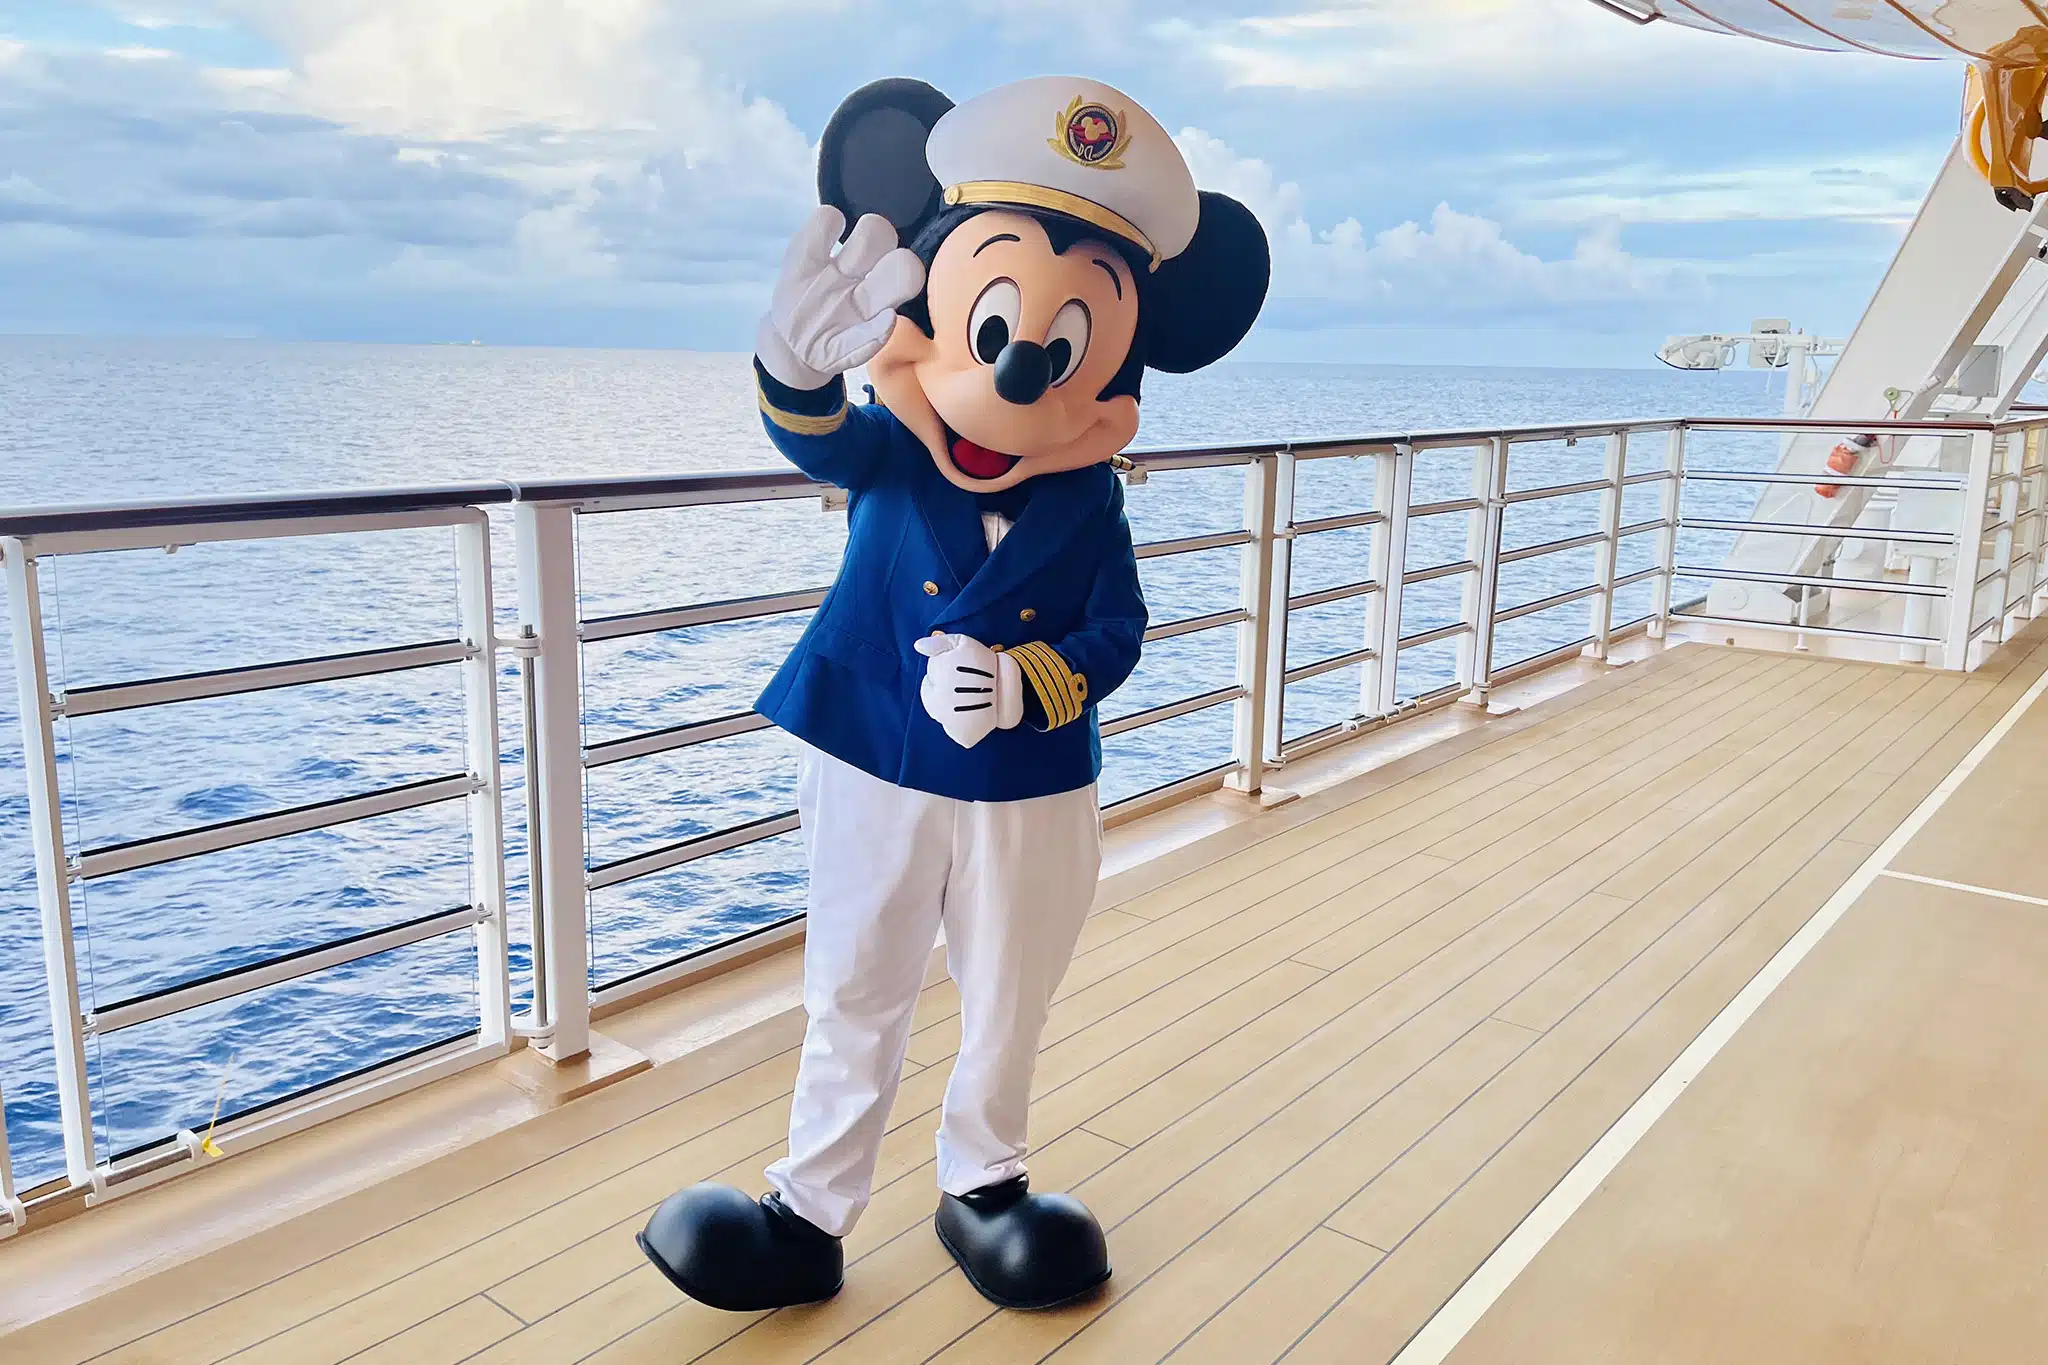 disney-cruise-line-concierge-room-complimentary-meet-and-greet